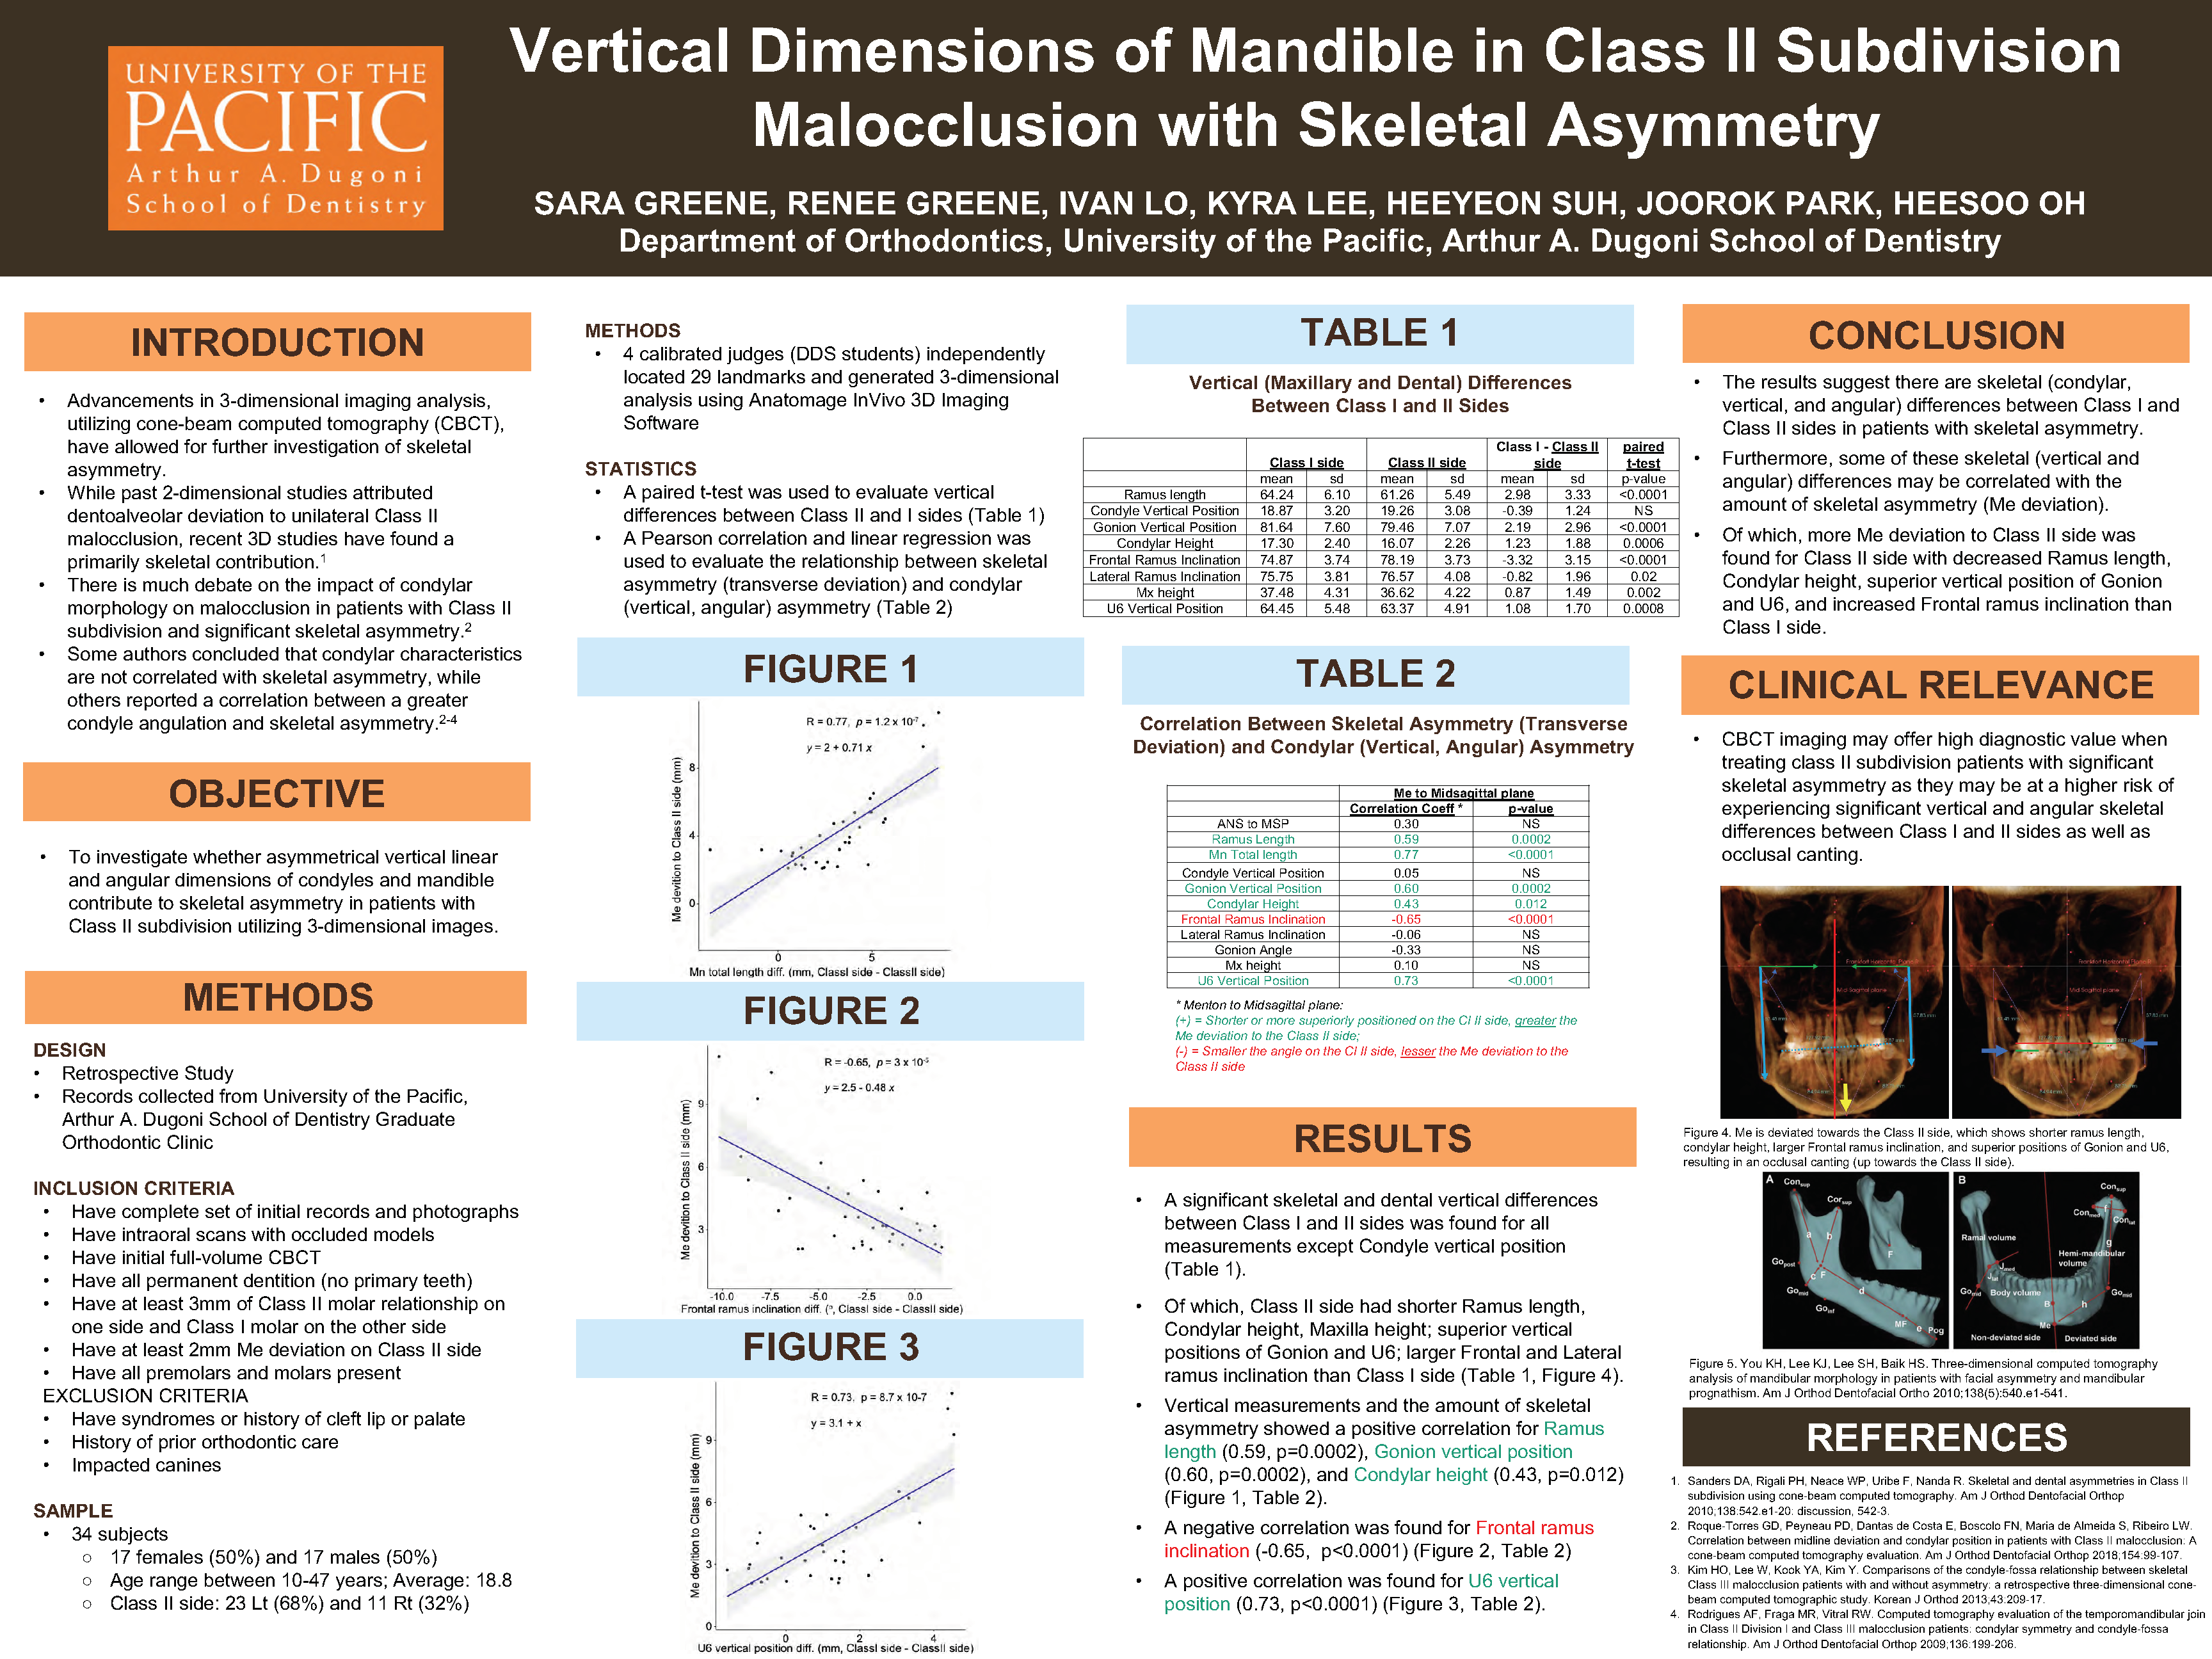 Vertical Dimensions of Mandible in Class II Subdivision Malocclusion with Skeletal Asymmetry